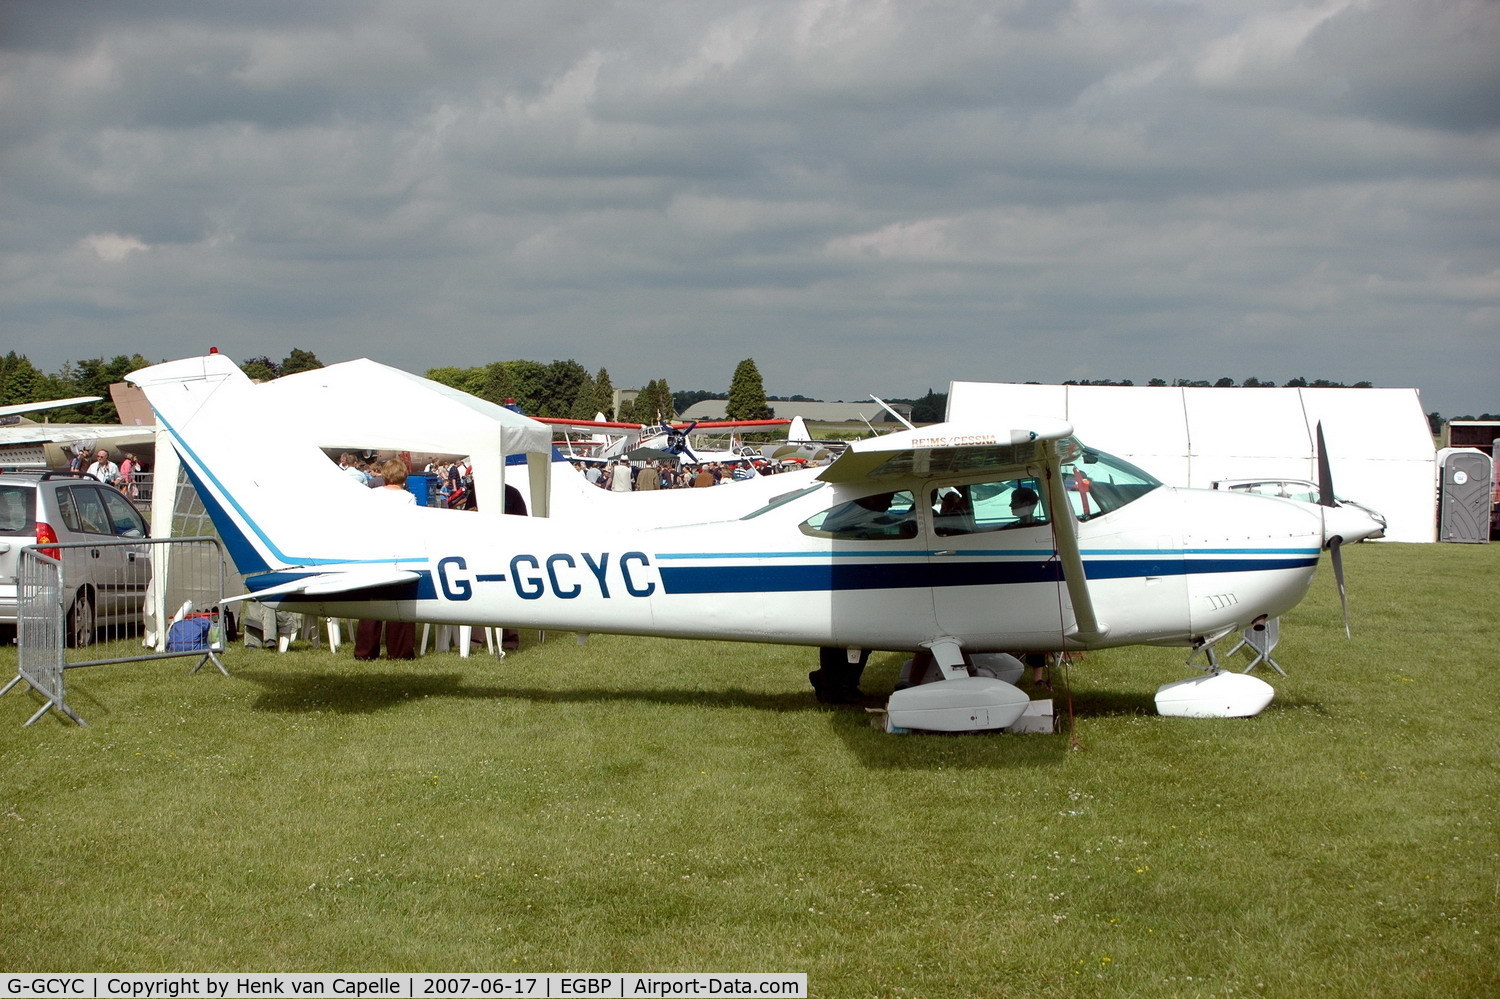 G-GCYC, 1980 Reims F182Q Skylane C/N 0157, Parked at Kemble airfield